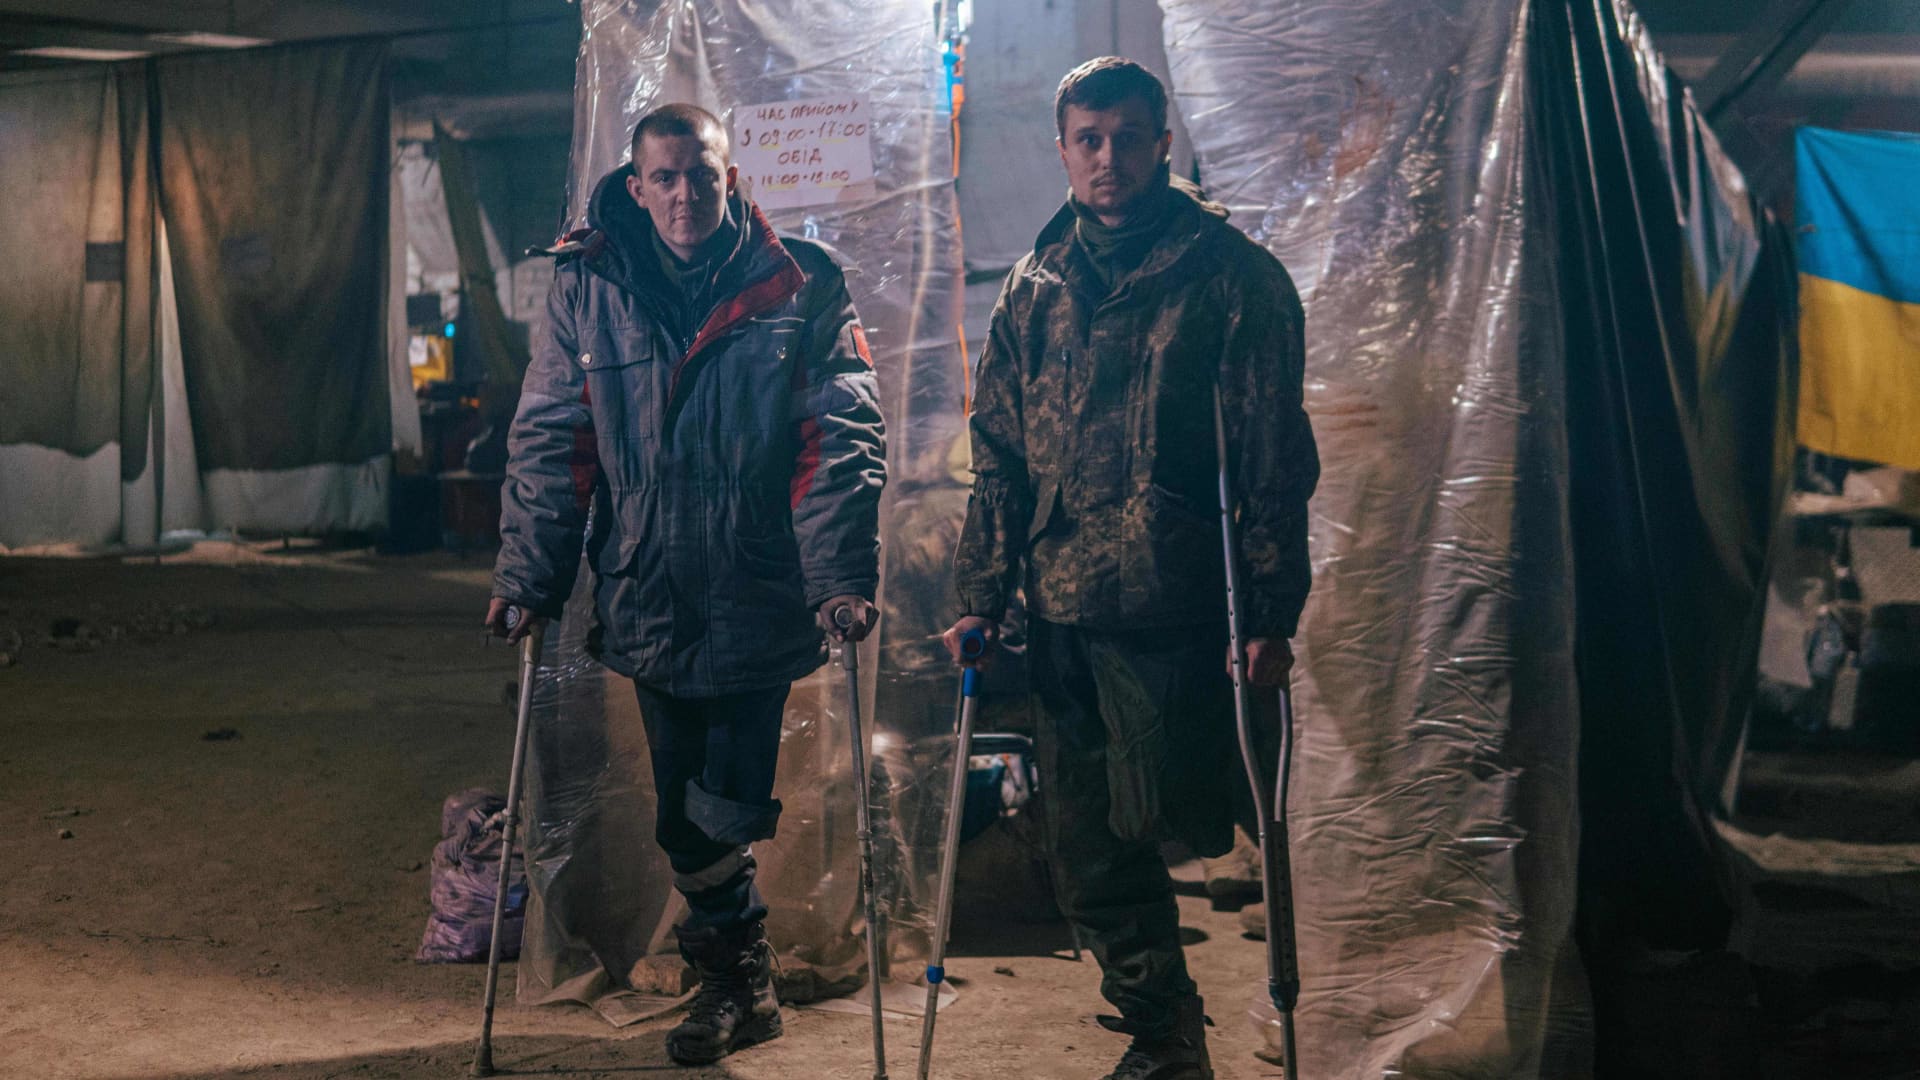 This photo released on May 10, 2022 by the Azov regiment shows two injured Ukrainian servicemen inside the Azovstal iron and steel works factory in eastern Mariupol, Ukraine, amid the Russian invasion.